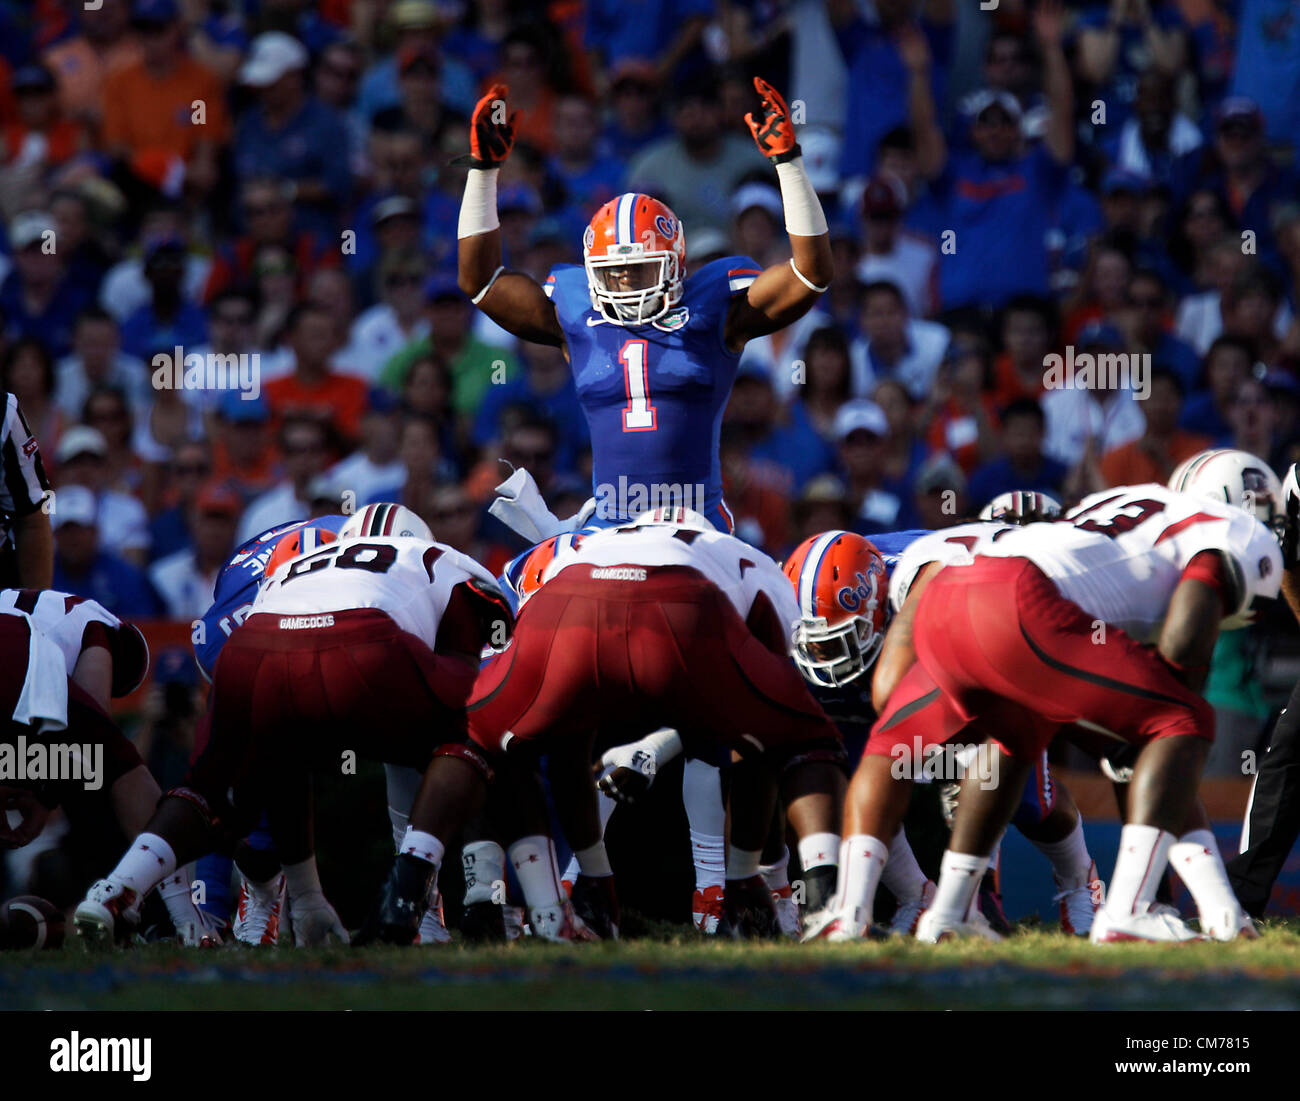 Oct. 20, 2012 - Gainesville, Florida, U.S. - Florida Gators linebacker JON BOSTIC (1) pumps up the crowd during the second quarter of the South Carolina Gamecocks at the Florida Gators football game at Ben Hill Griffin Stadium. The Gators defeated the Gamecocks 44-11. (Credit Image: © Will Vragovic/Tampa Bay Times/ZUMAPRESS.com) Stock Photo